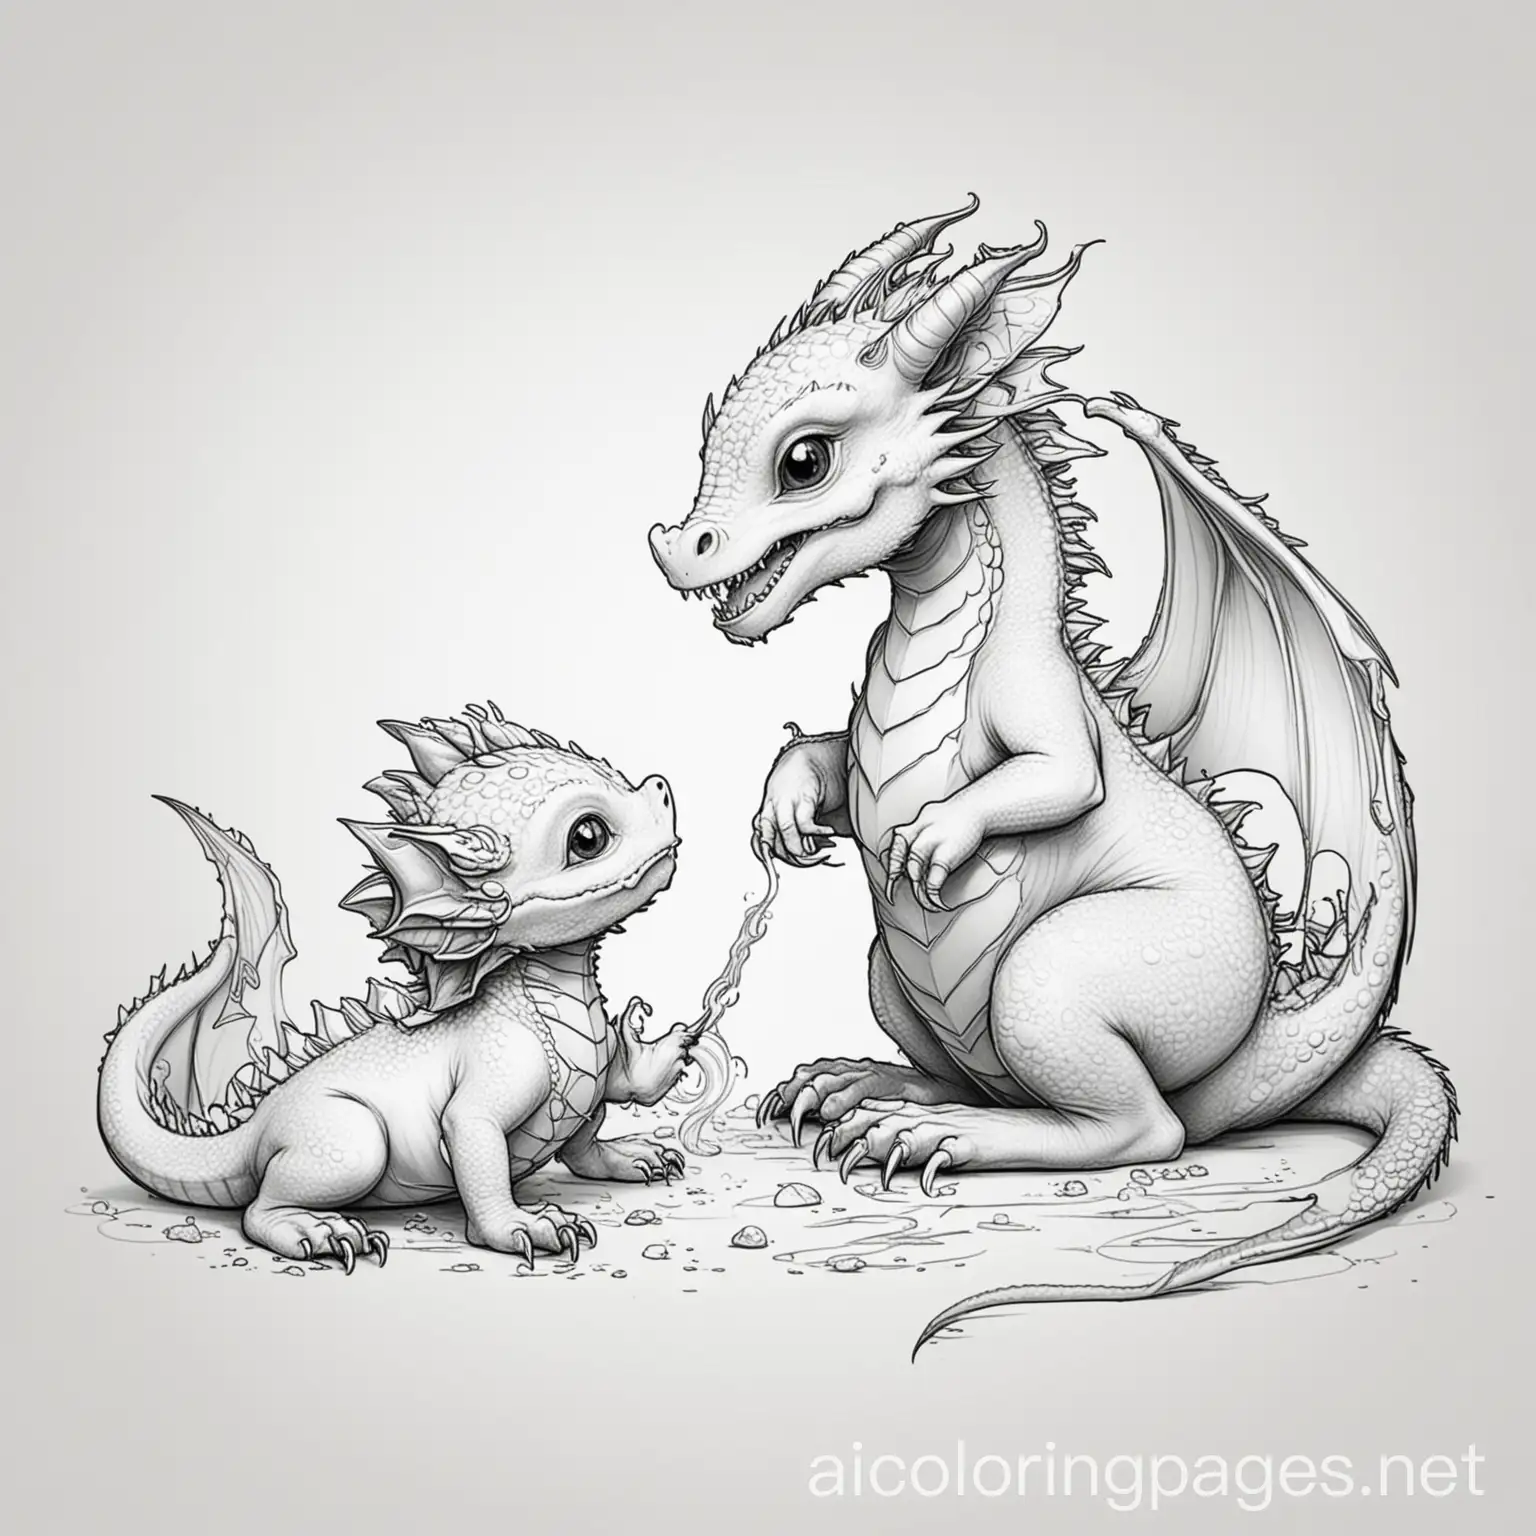 babydragon playing with child, Coloring Page, black and white, line art, white background, Simplicity, Ample White Space